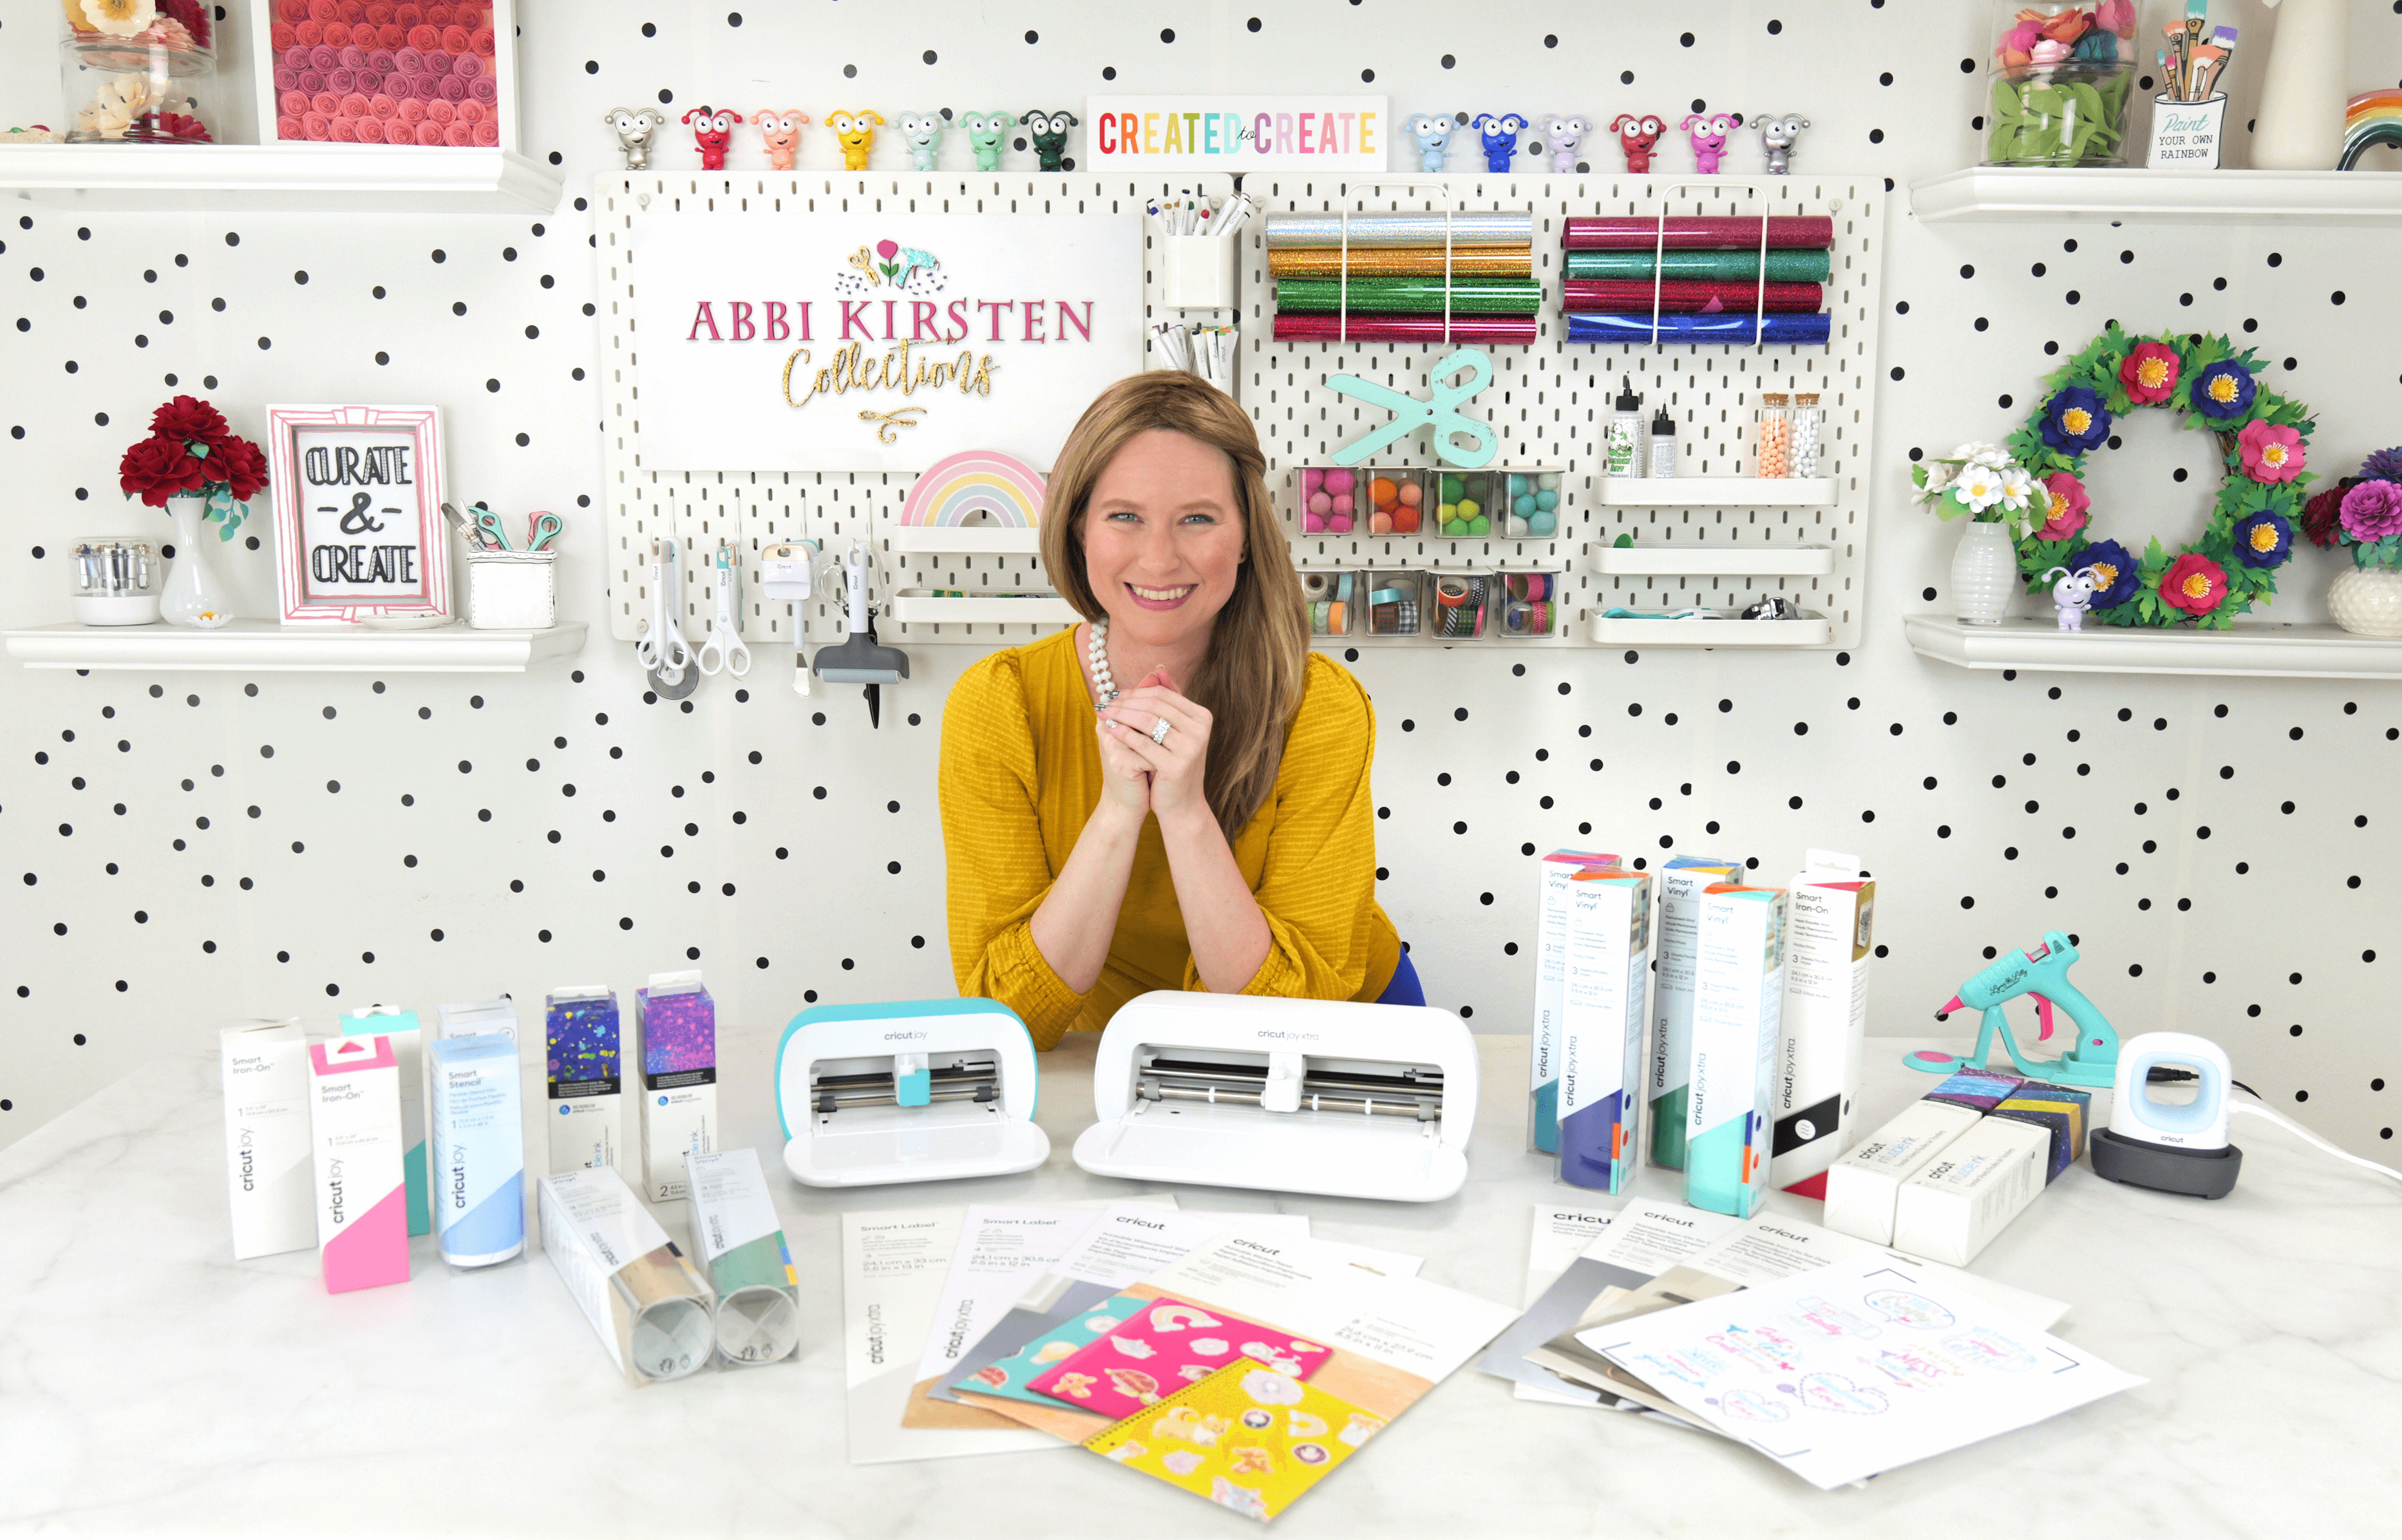 Abbi Kirsten with craft materials and cricut joy machines on a craft table.